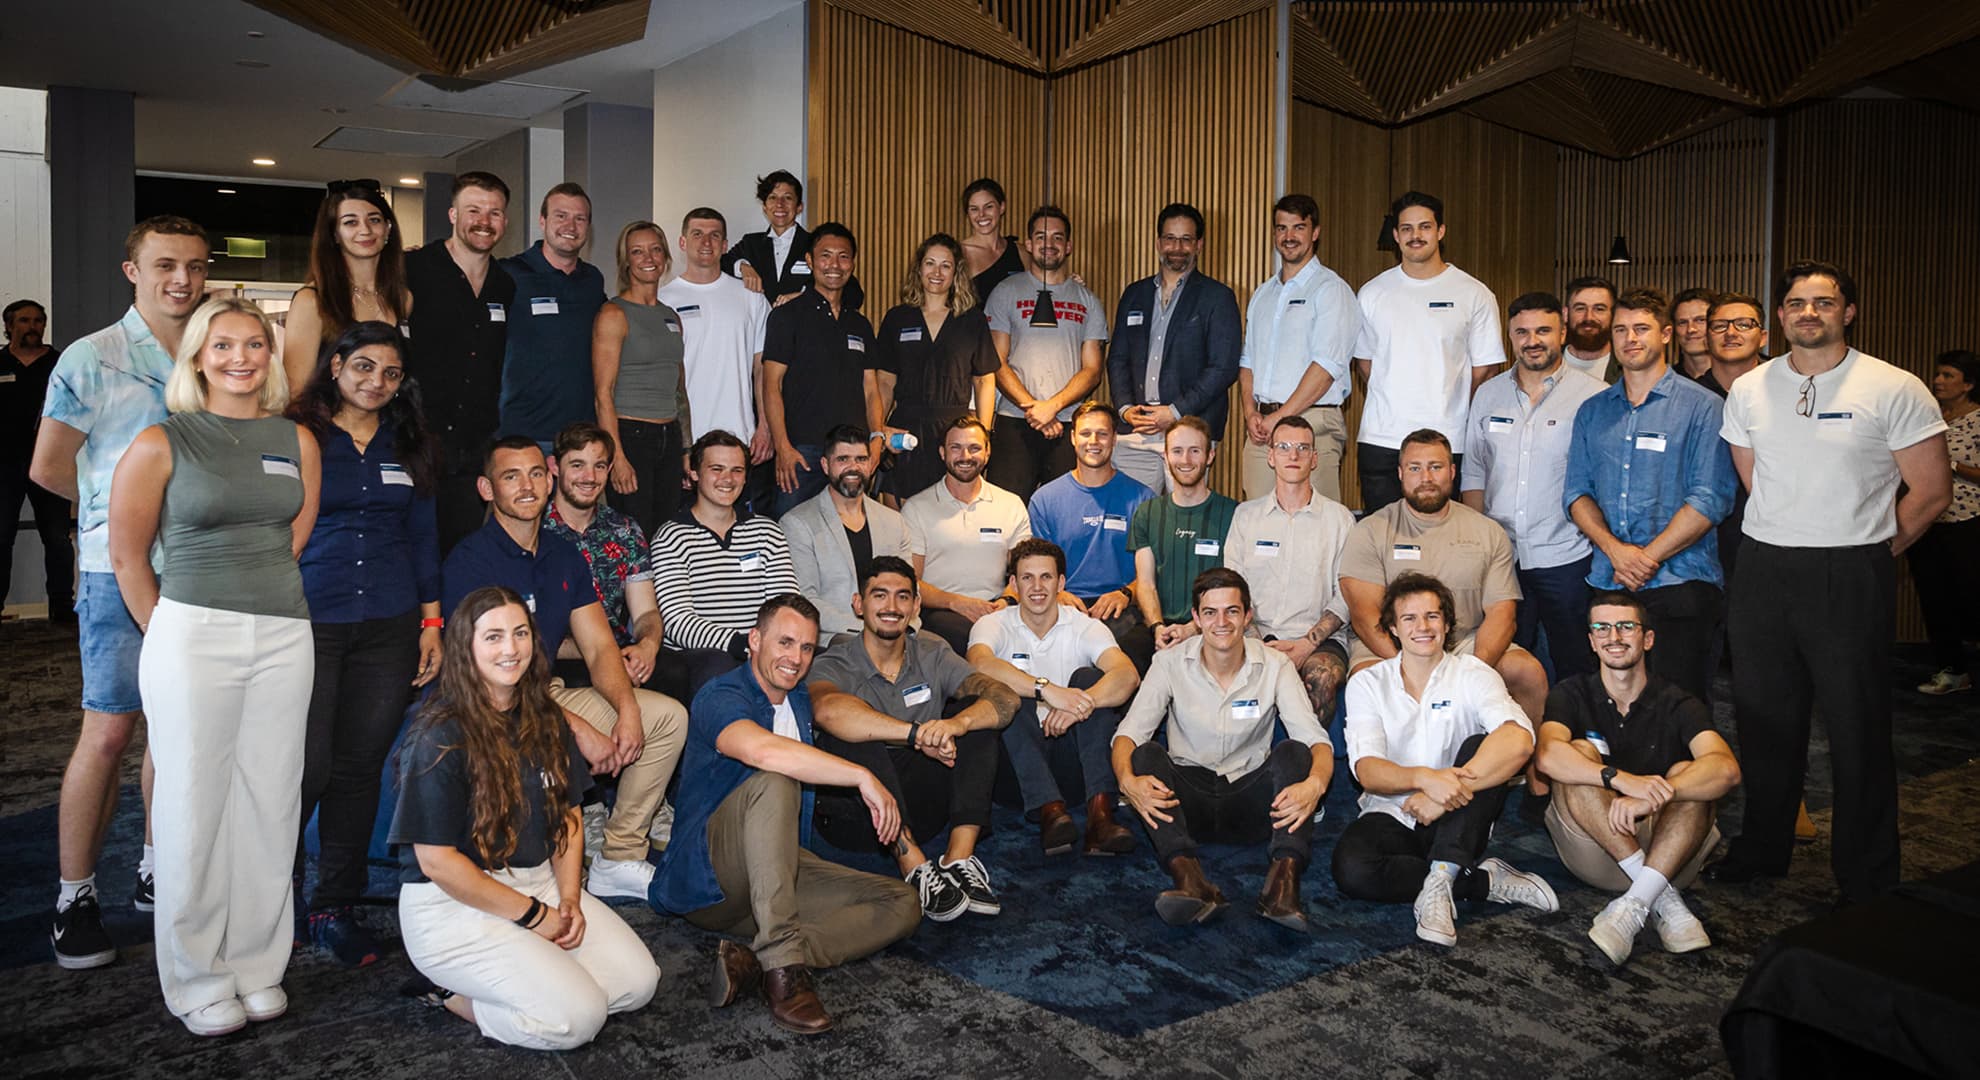 A group photo of students, alumni and strength and conditioning industry professionals at the celebratory event.